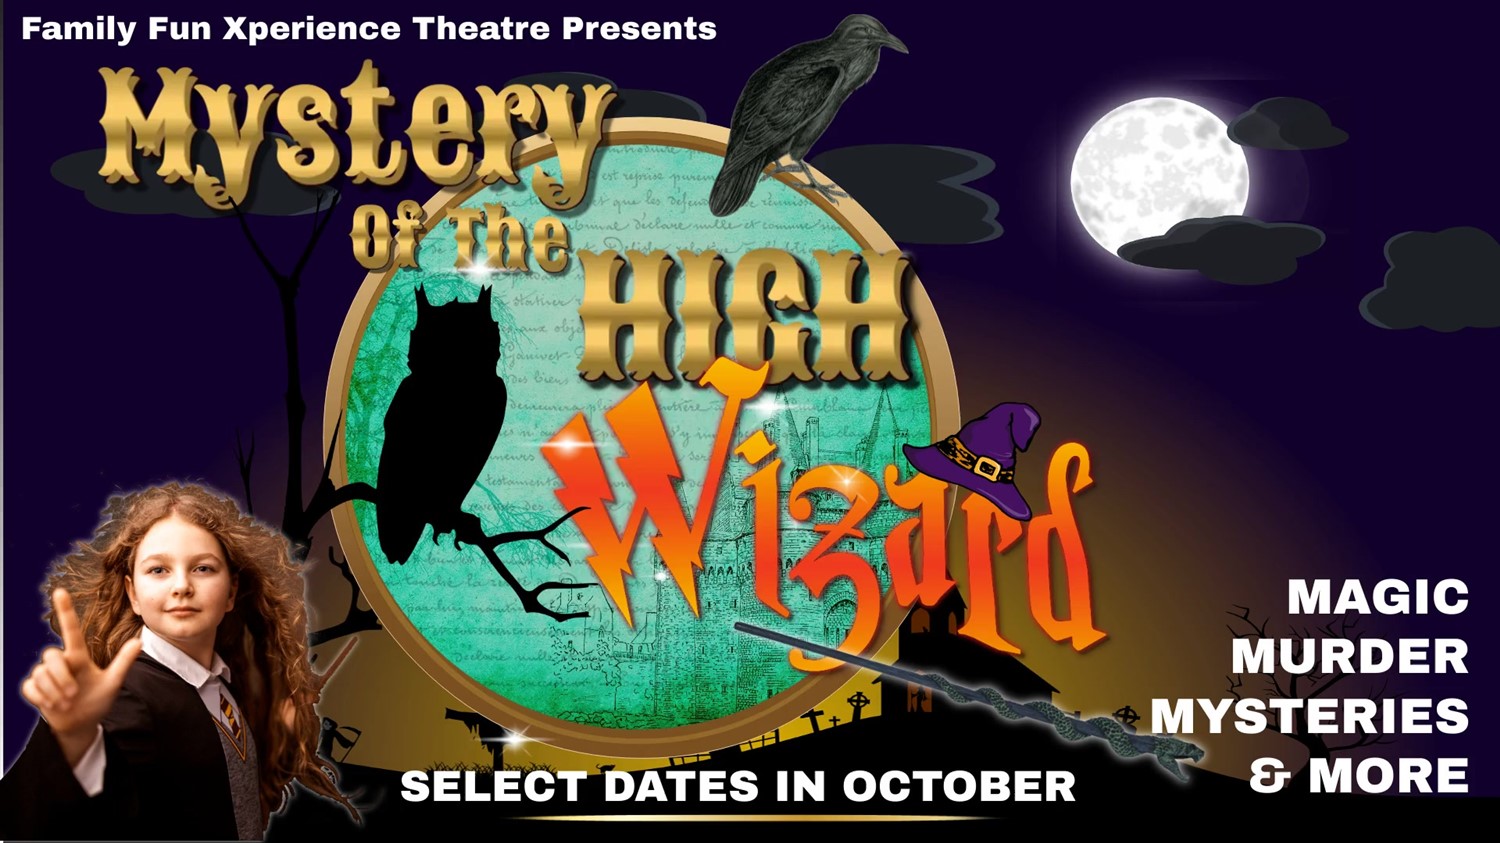 🗝 MYSTERY of the HIGH WIZARD⚡️ Magic, Murder, Mysteries, and More to solve! on Oct 29, 19:00@FFX Theatre - Pick a seat, Buy tickets and Get information on Family Fun Xperience tickets.ffxshow.org